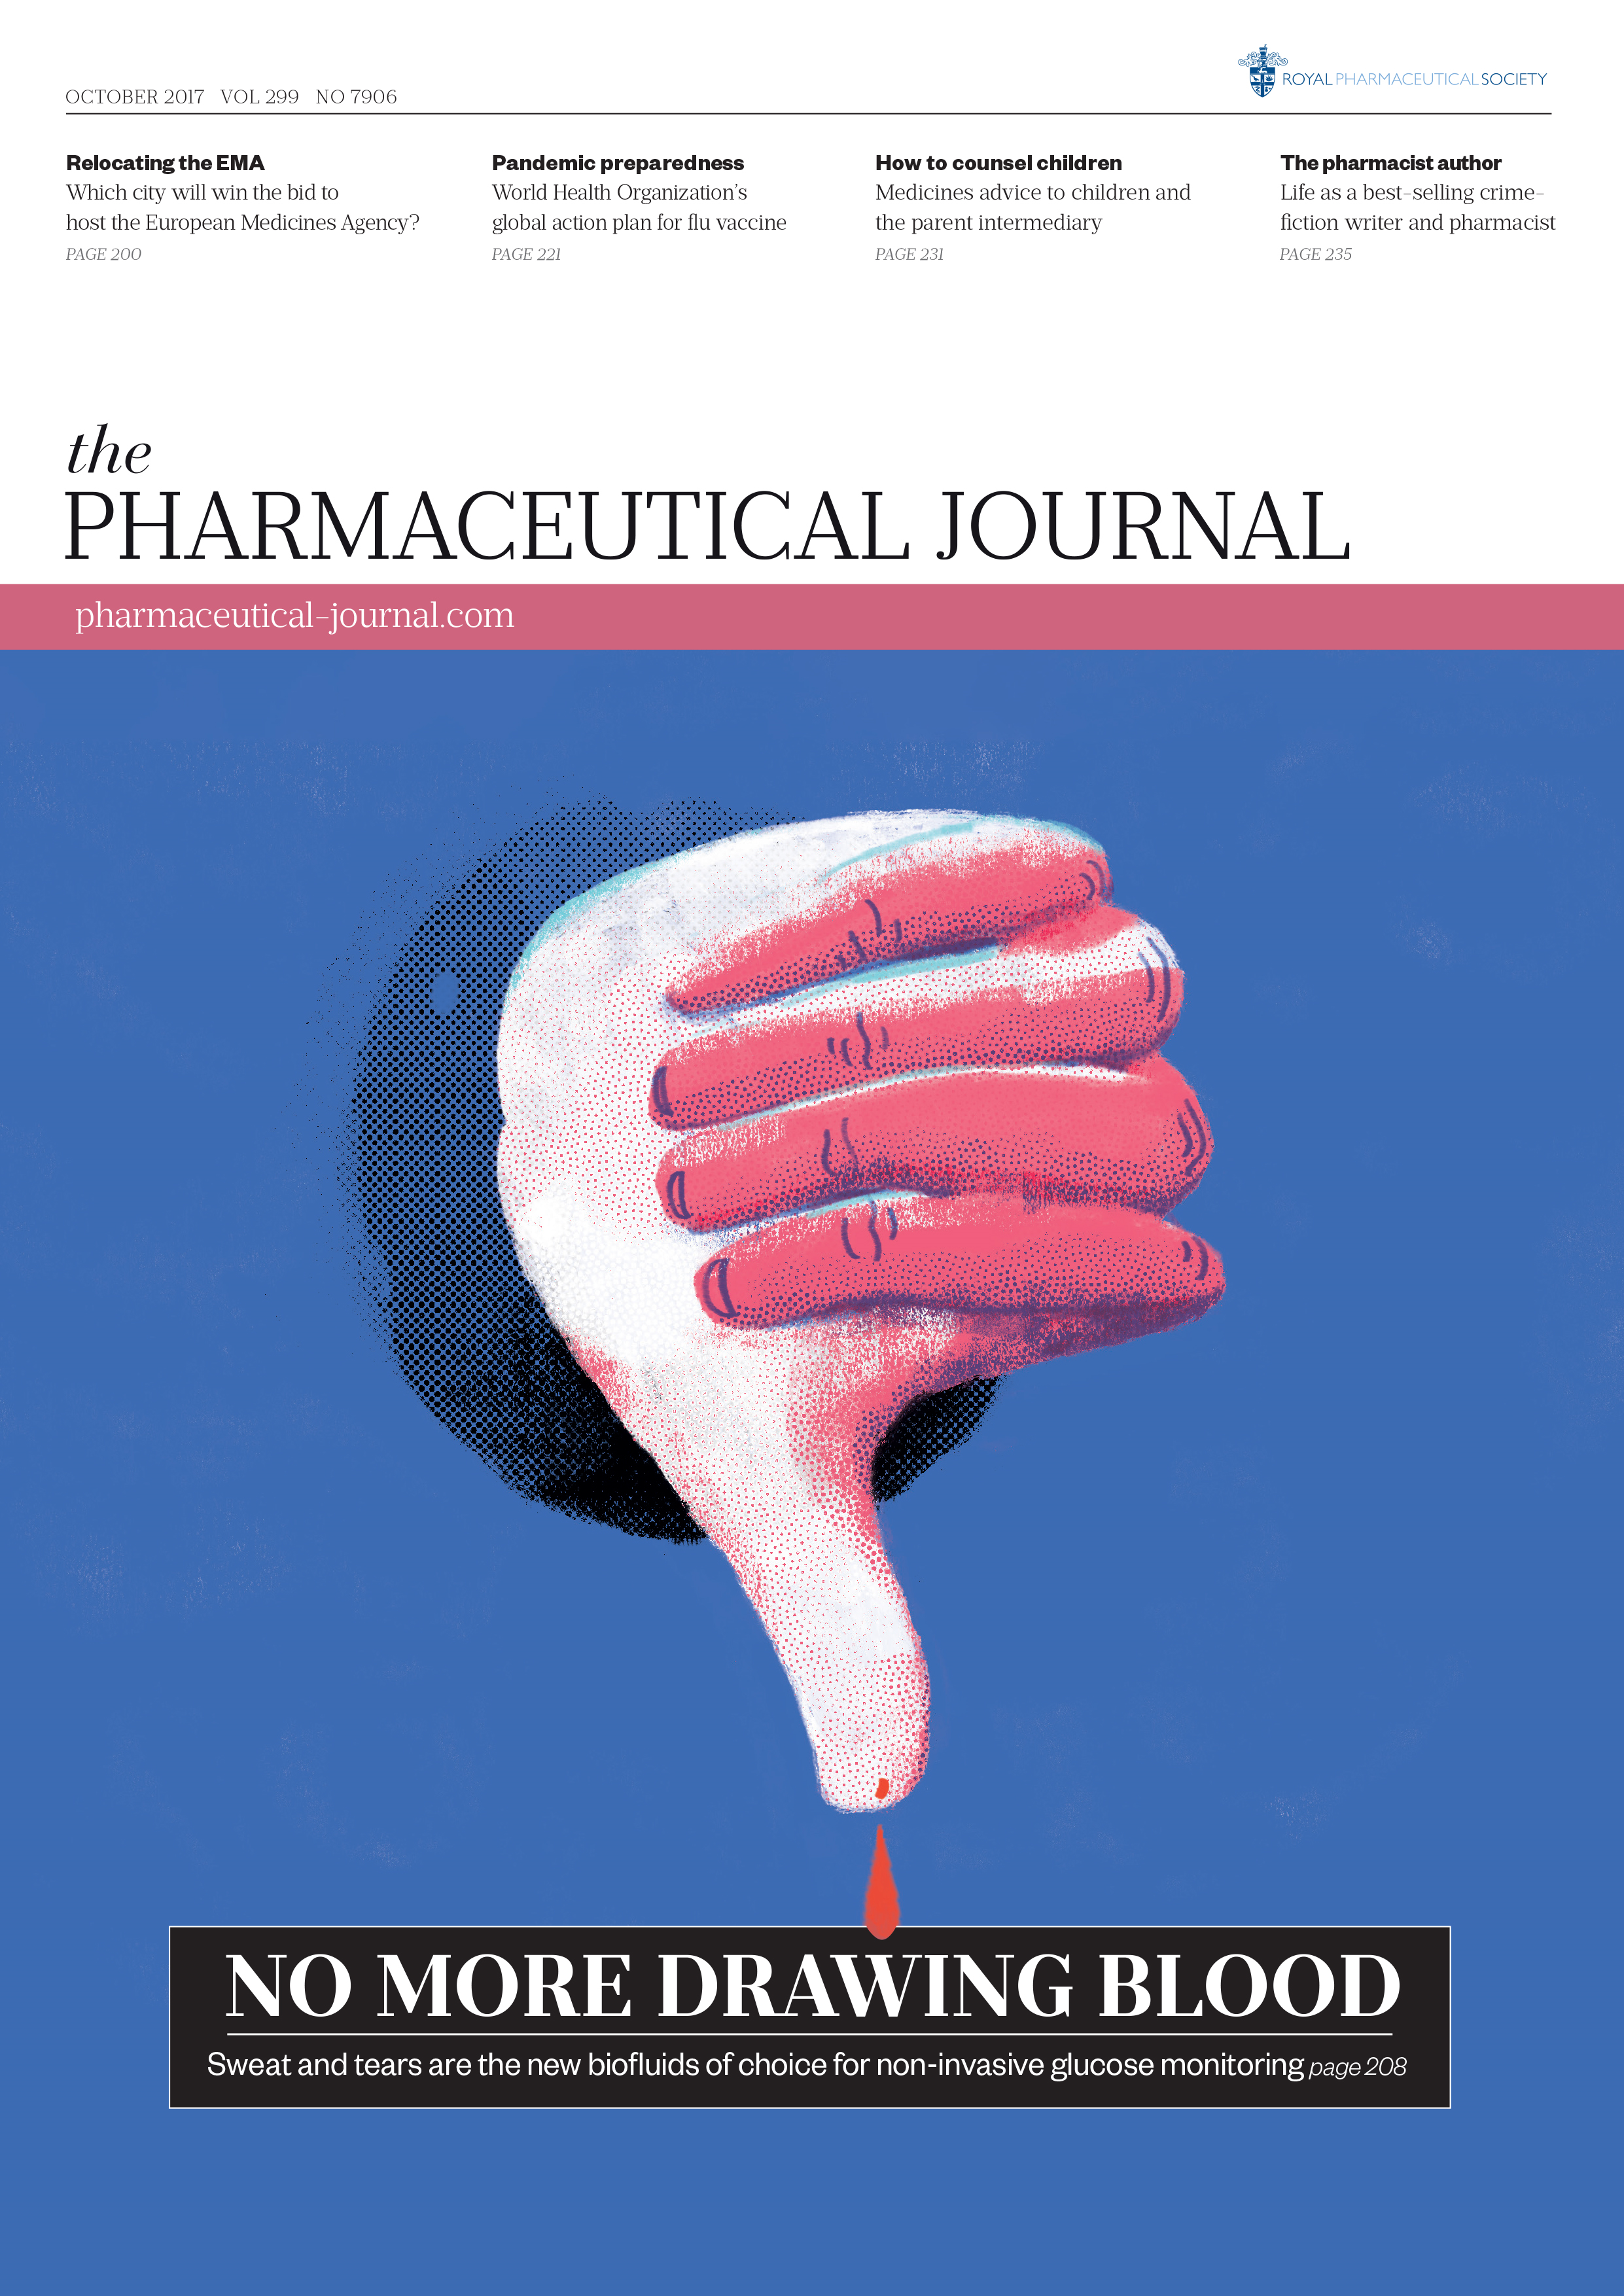 Publication issue cover for PJ, October 2017, Vol 299, No 7906